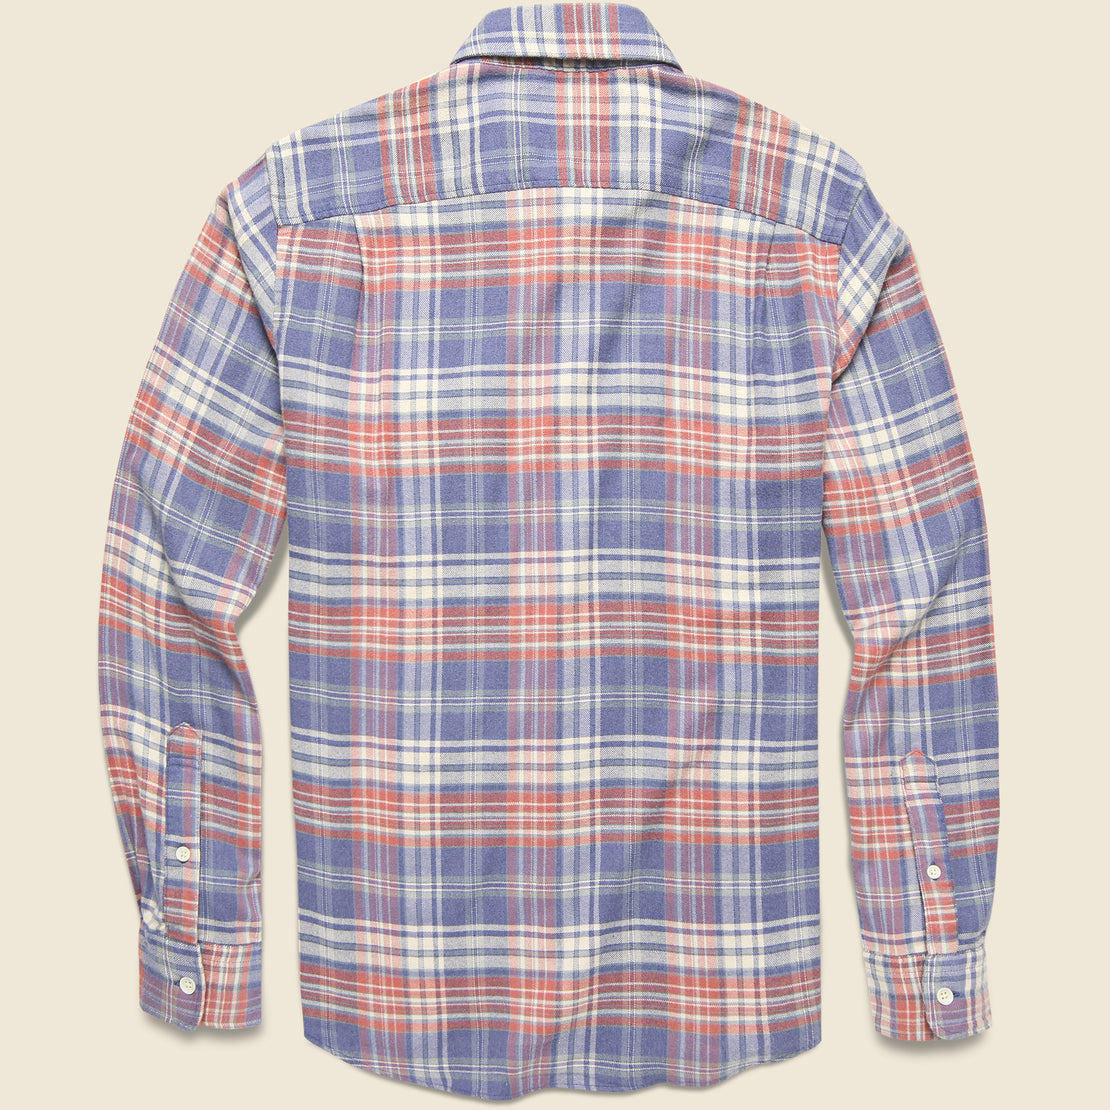 Movement Flannel - Autumn Plaid - Faherty - STAG Provisions - Tops - L/S Woven - Plaid